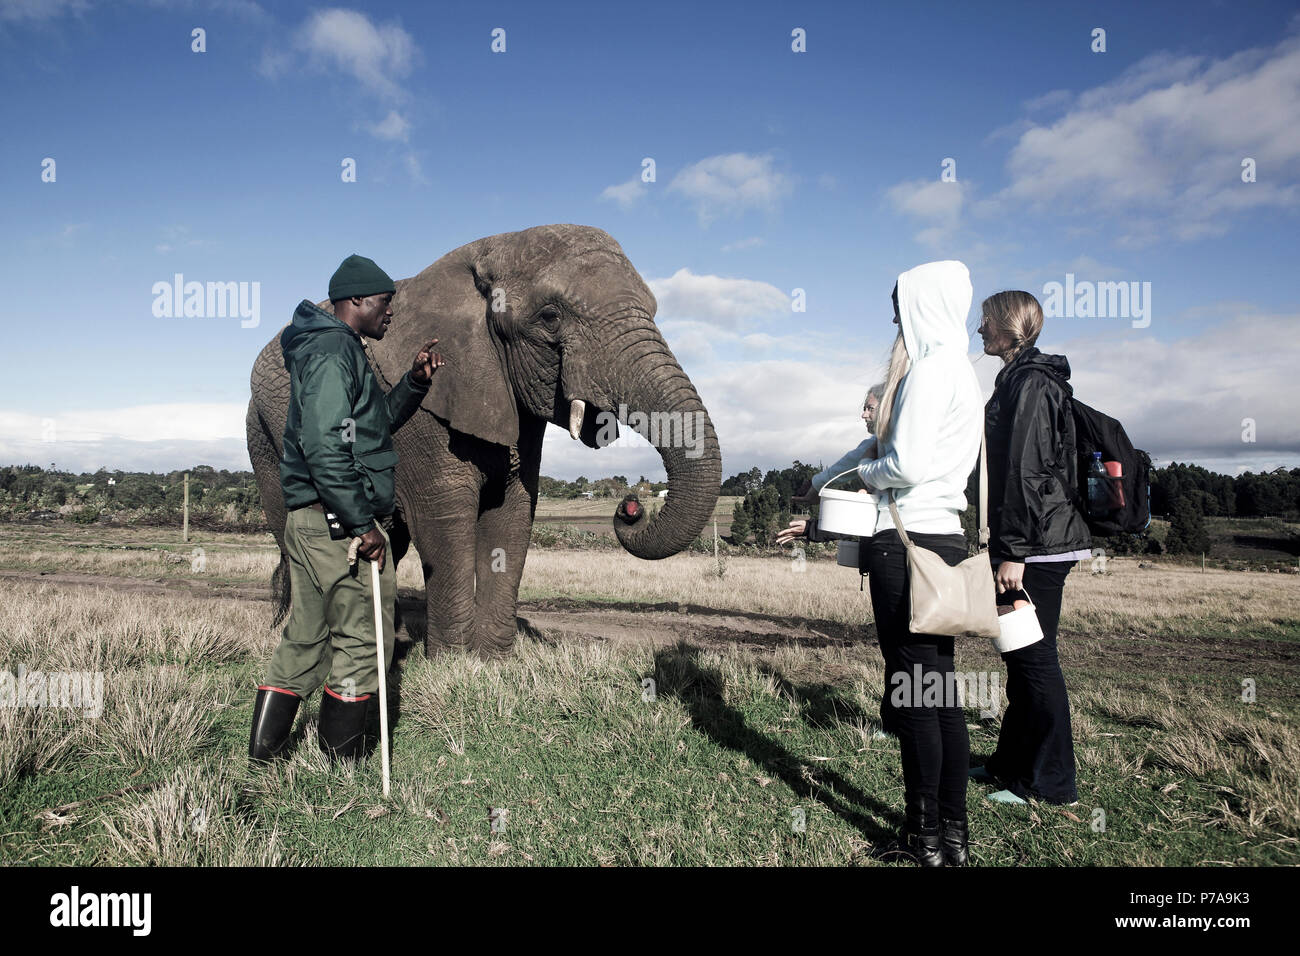 Guide speaking with young women Knysna elephant park, South Africa Stock Photo